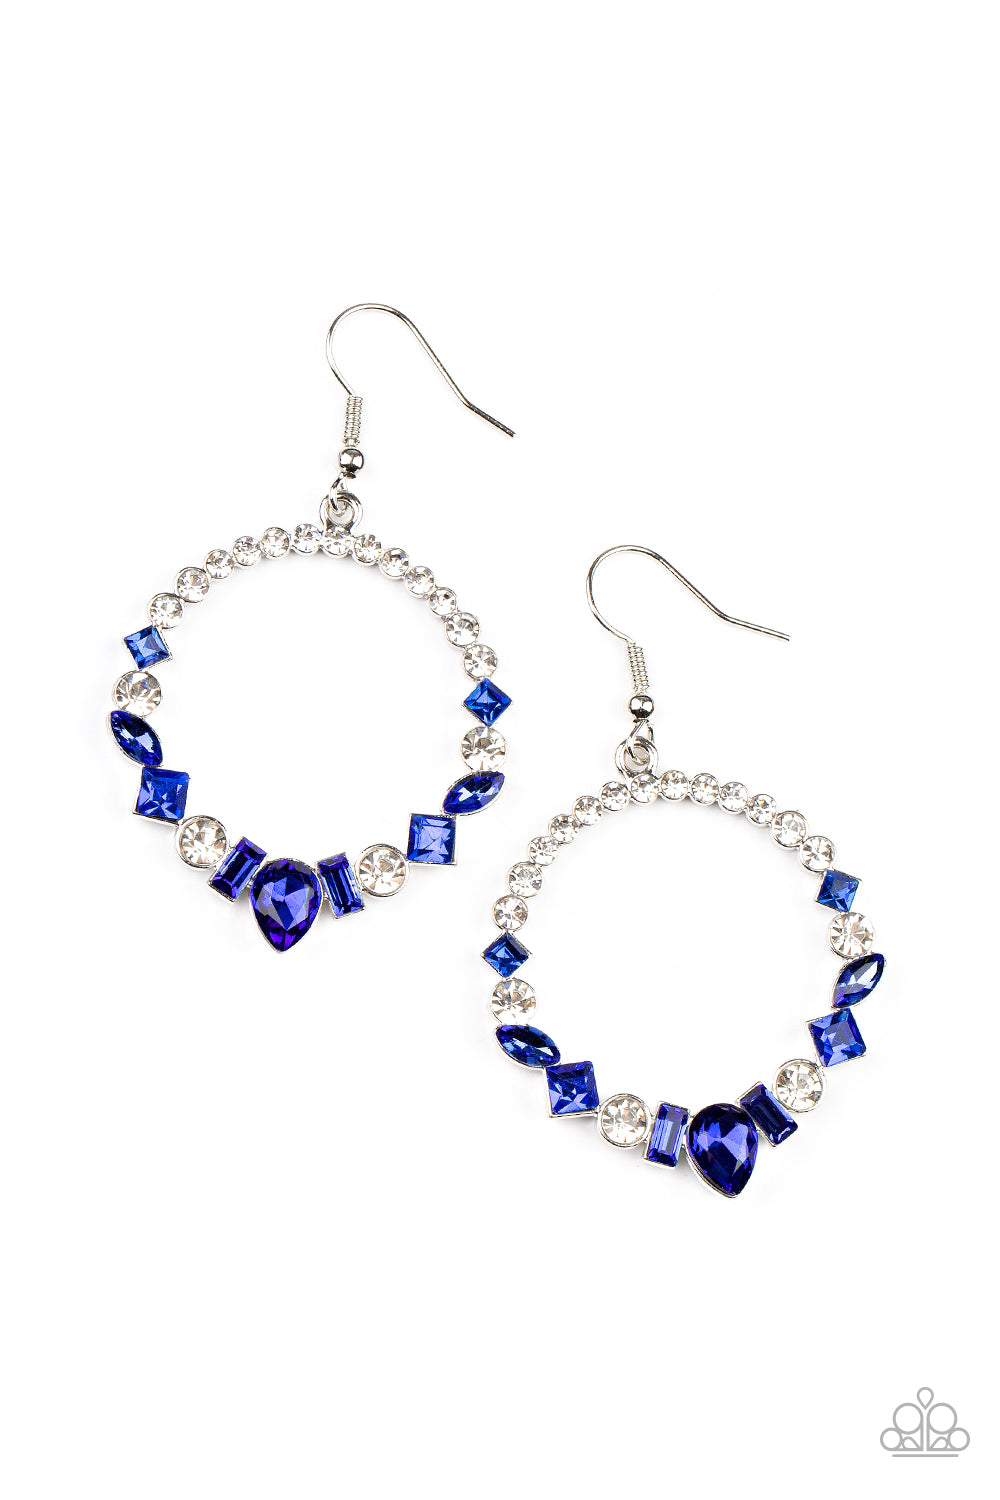 Revolutionary Refinement - Blue Earrings - Paparazzi Accessories